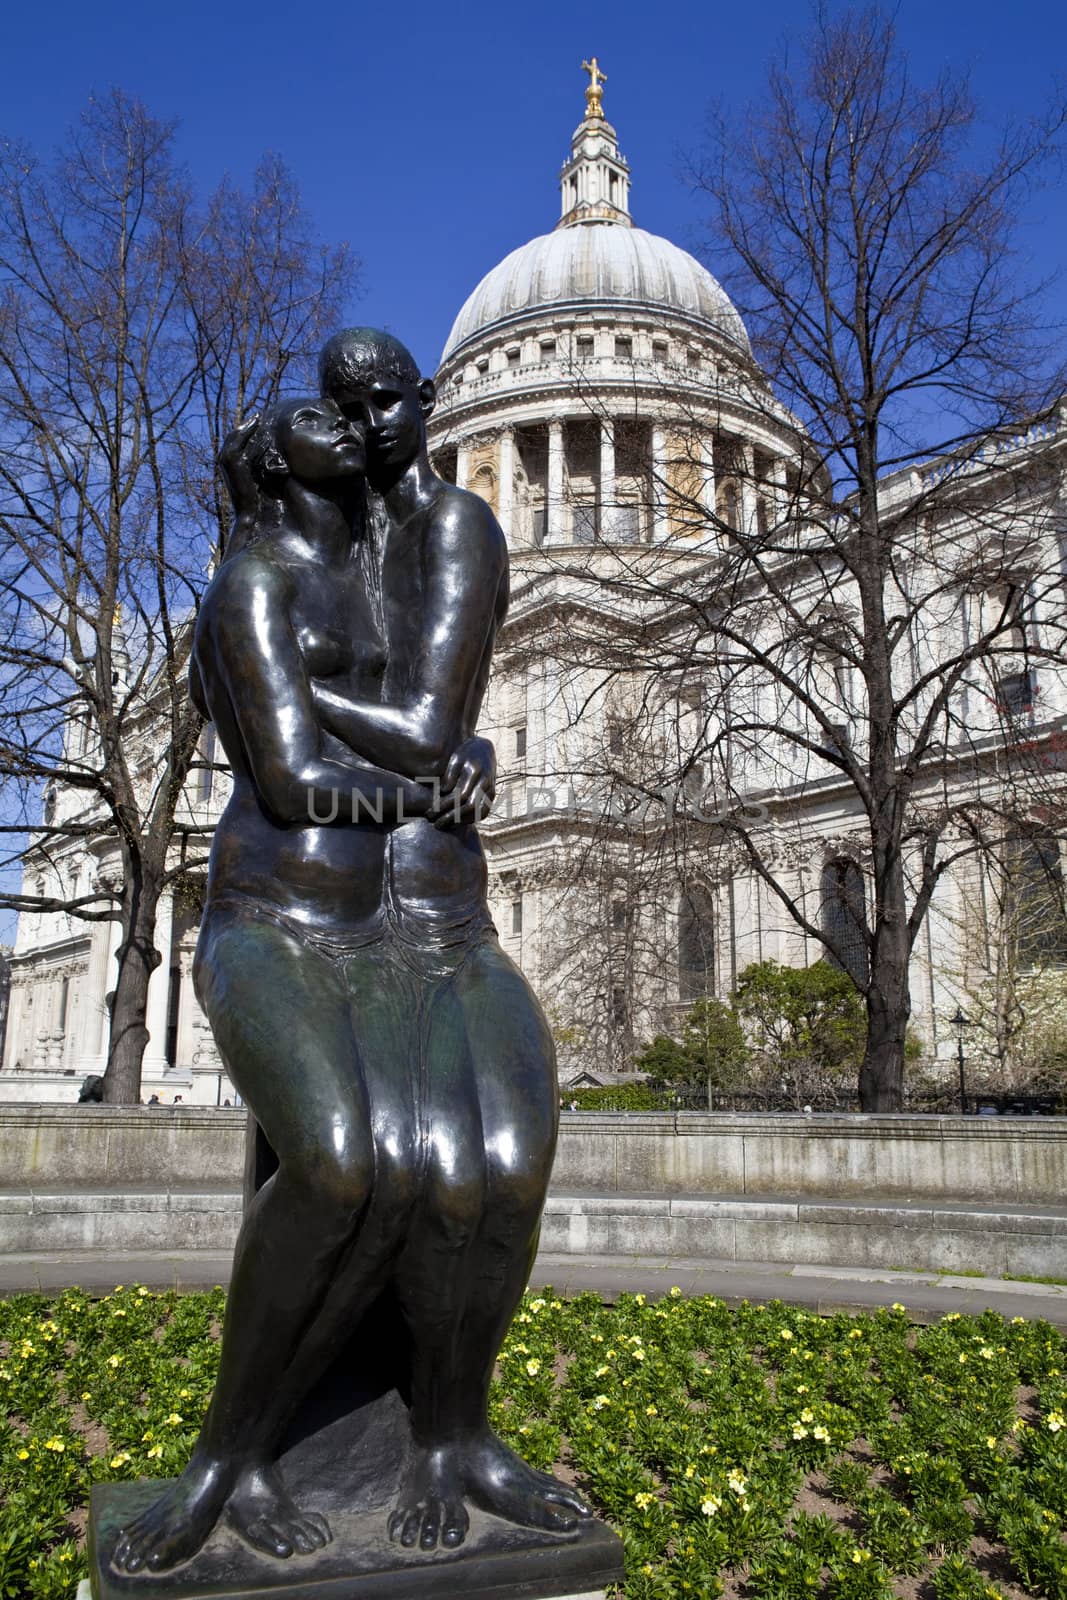 Young Lovers Sculpture and St. Paul's Cathedral in London